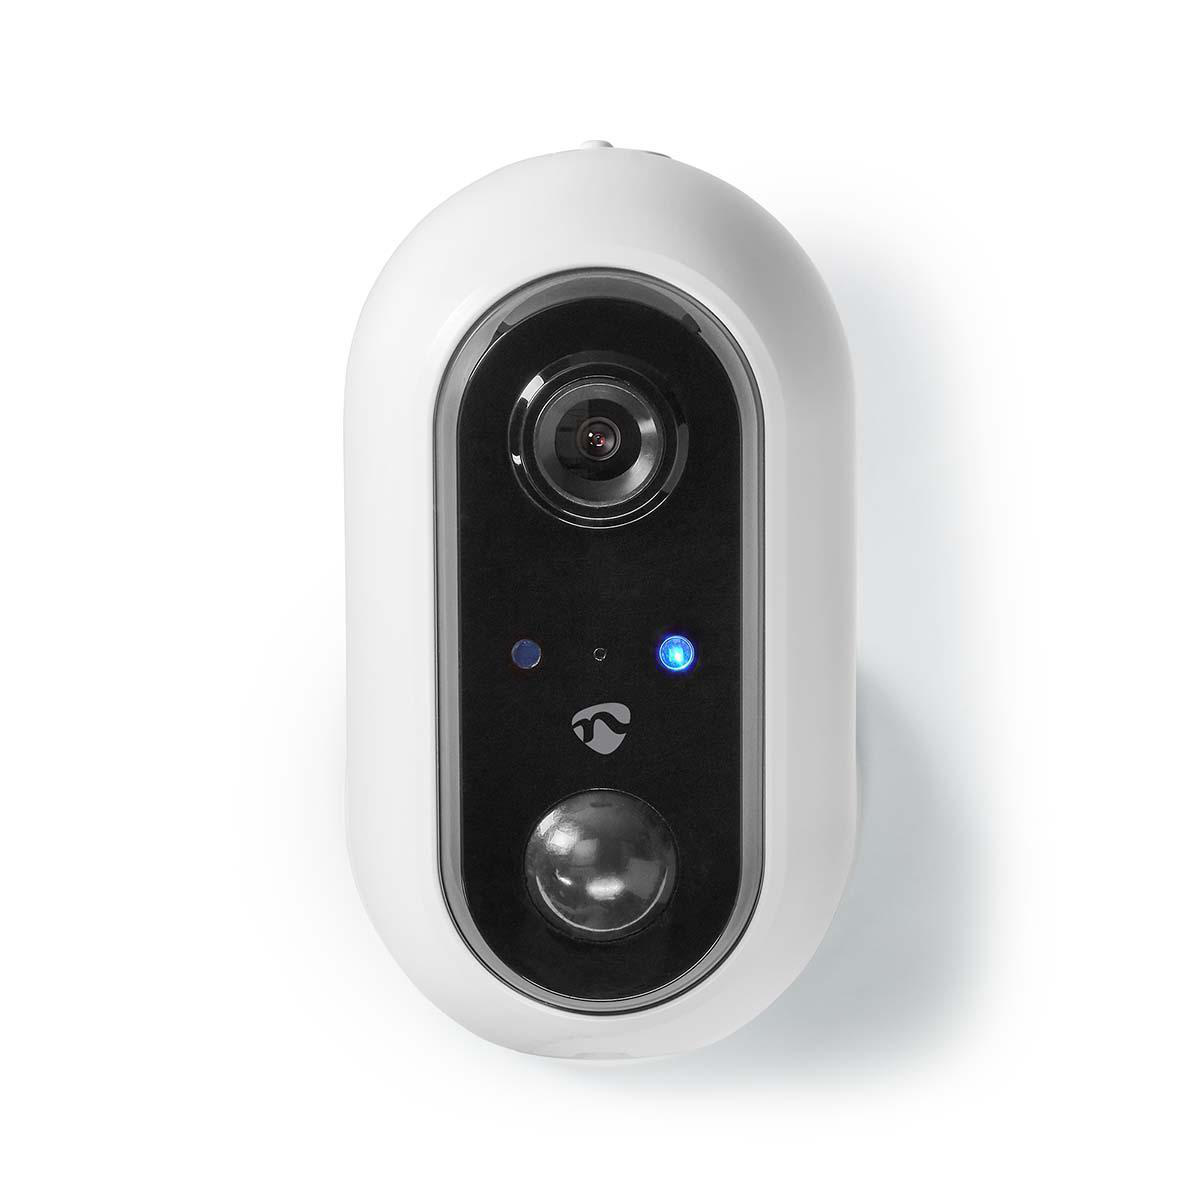 SmartLife Outdoor Wi-Fi Camera | Full HD 1080p | IP65 | Cloud / MicroSD | Motion sensor | Night vision | Android ™ & iOS | White